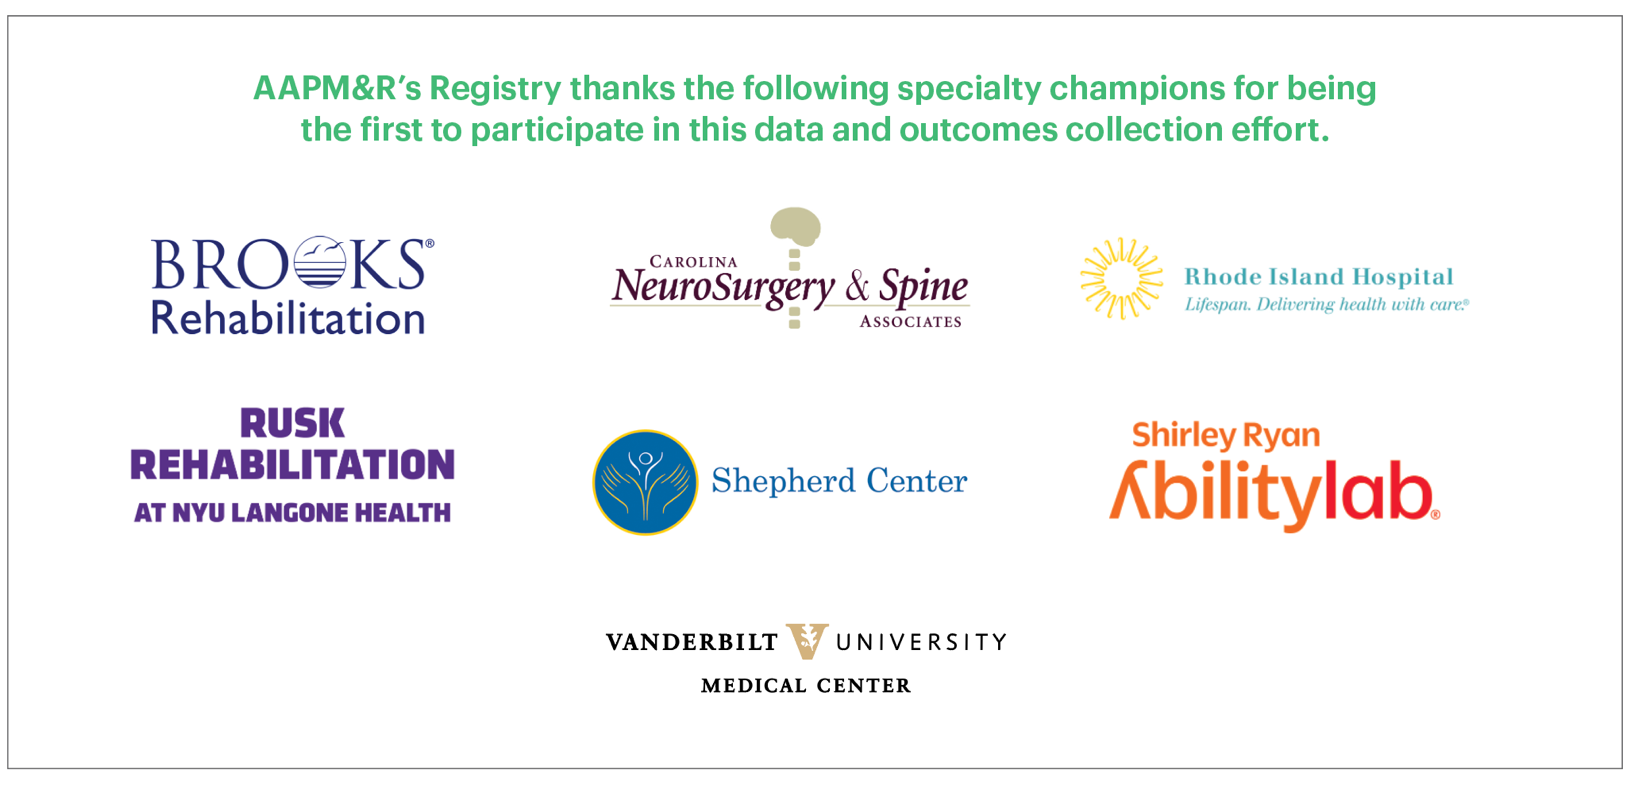 AAPM&R’s Registry and Shirley Ryan AbilityLab—Teaming Up to Provide Innovative, Data-Centric Care 3